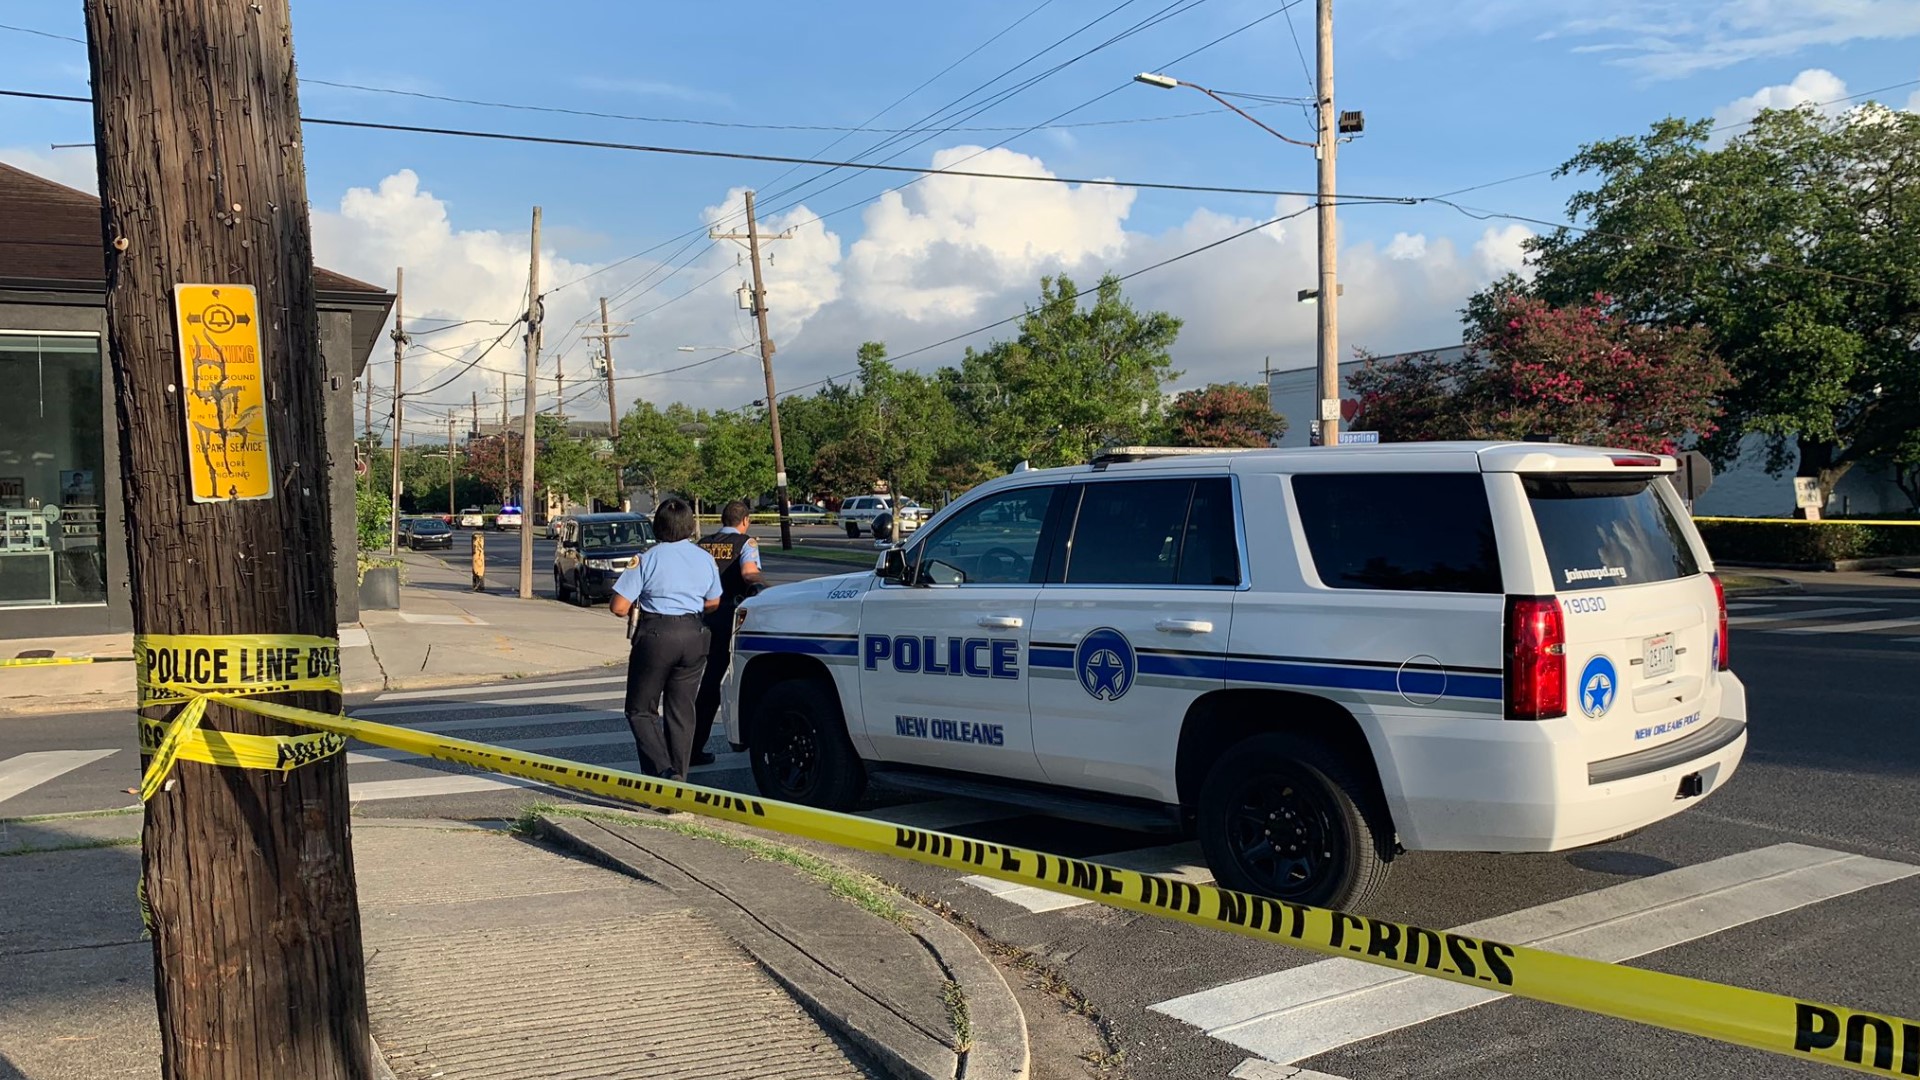 The New Orleans Police Department said the shooting happened in the 4900 block of Prytania Street.